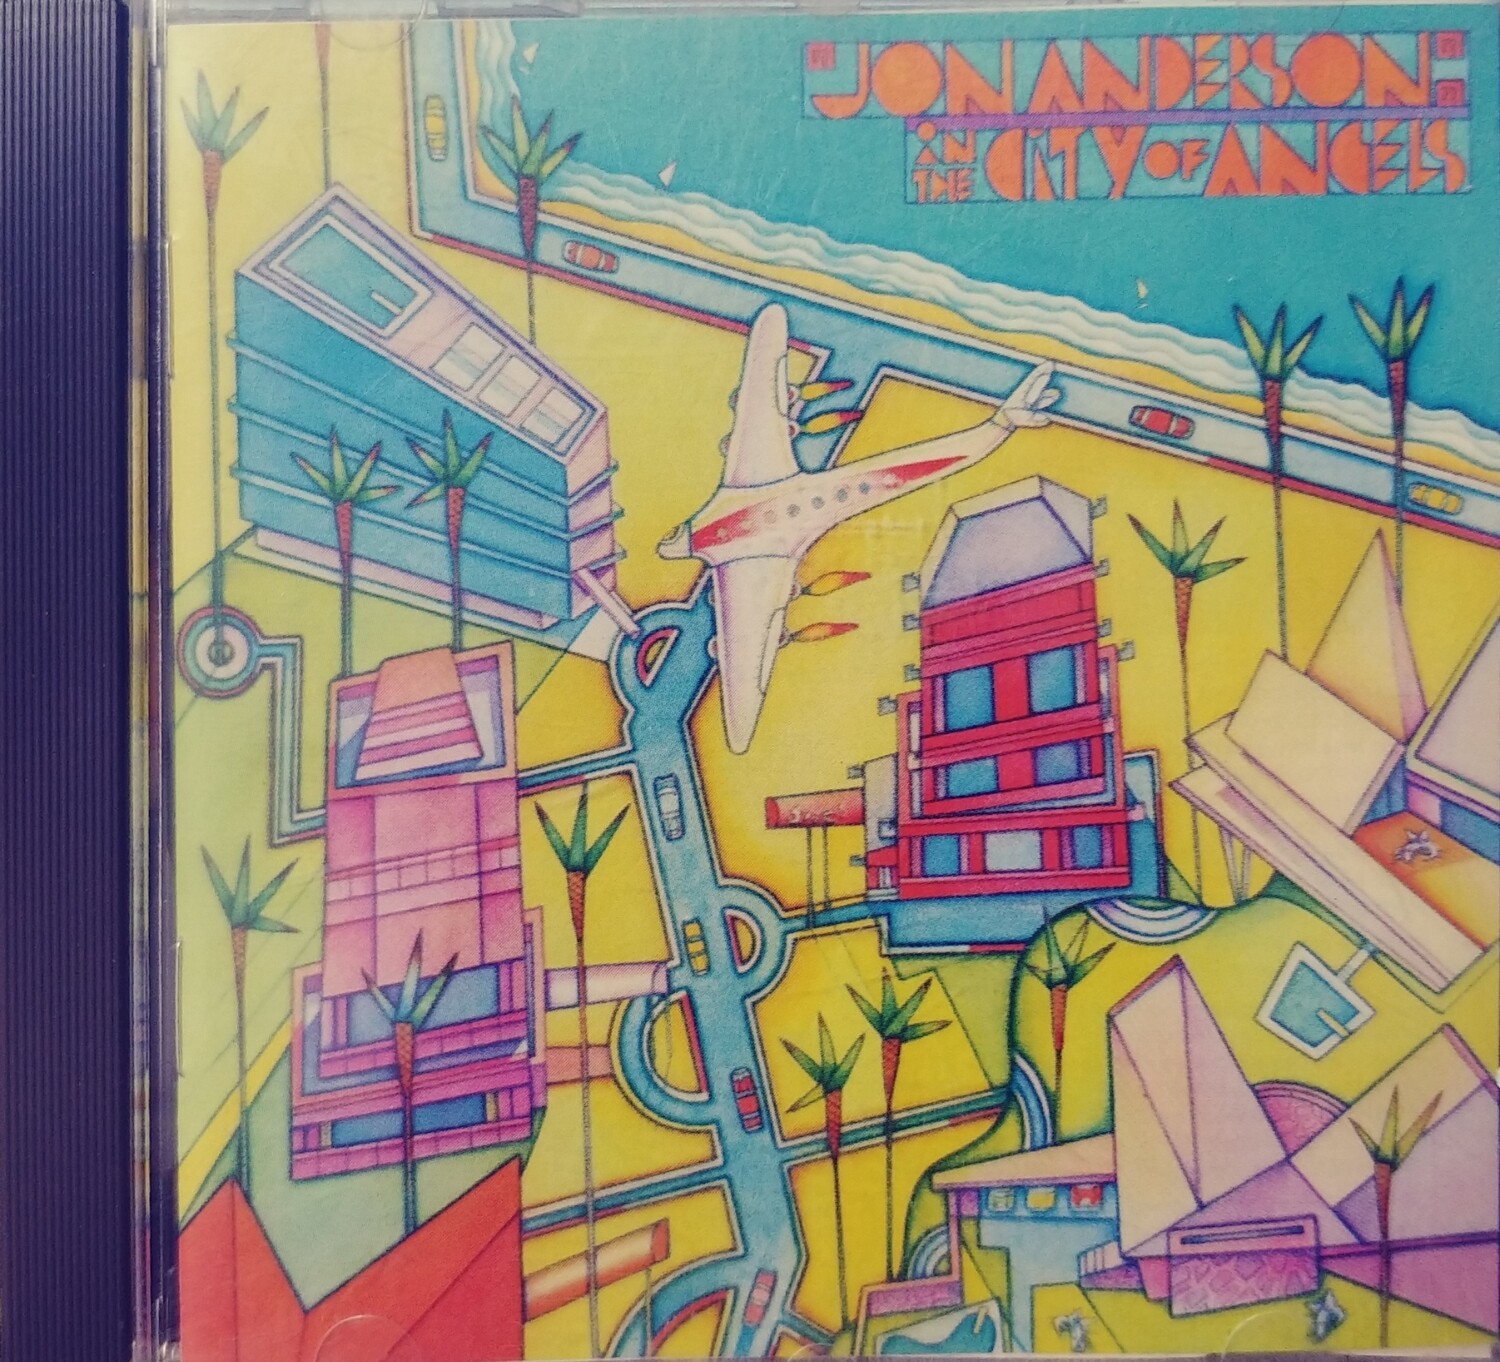 Jon Anderson - In the city of angels (CD)